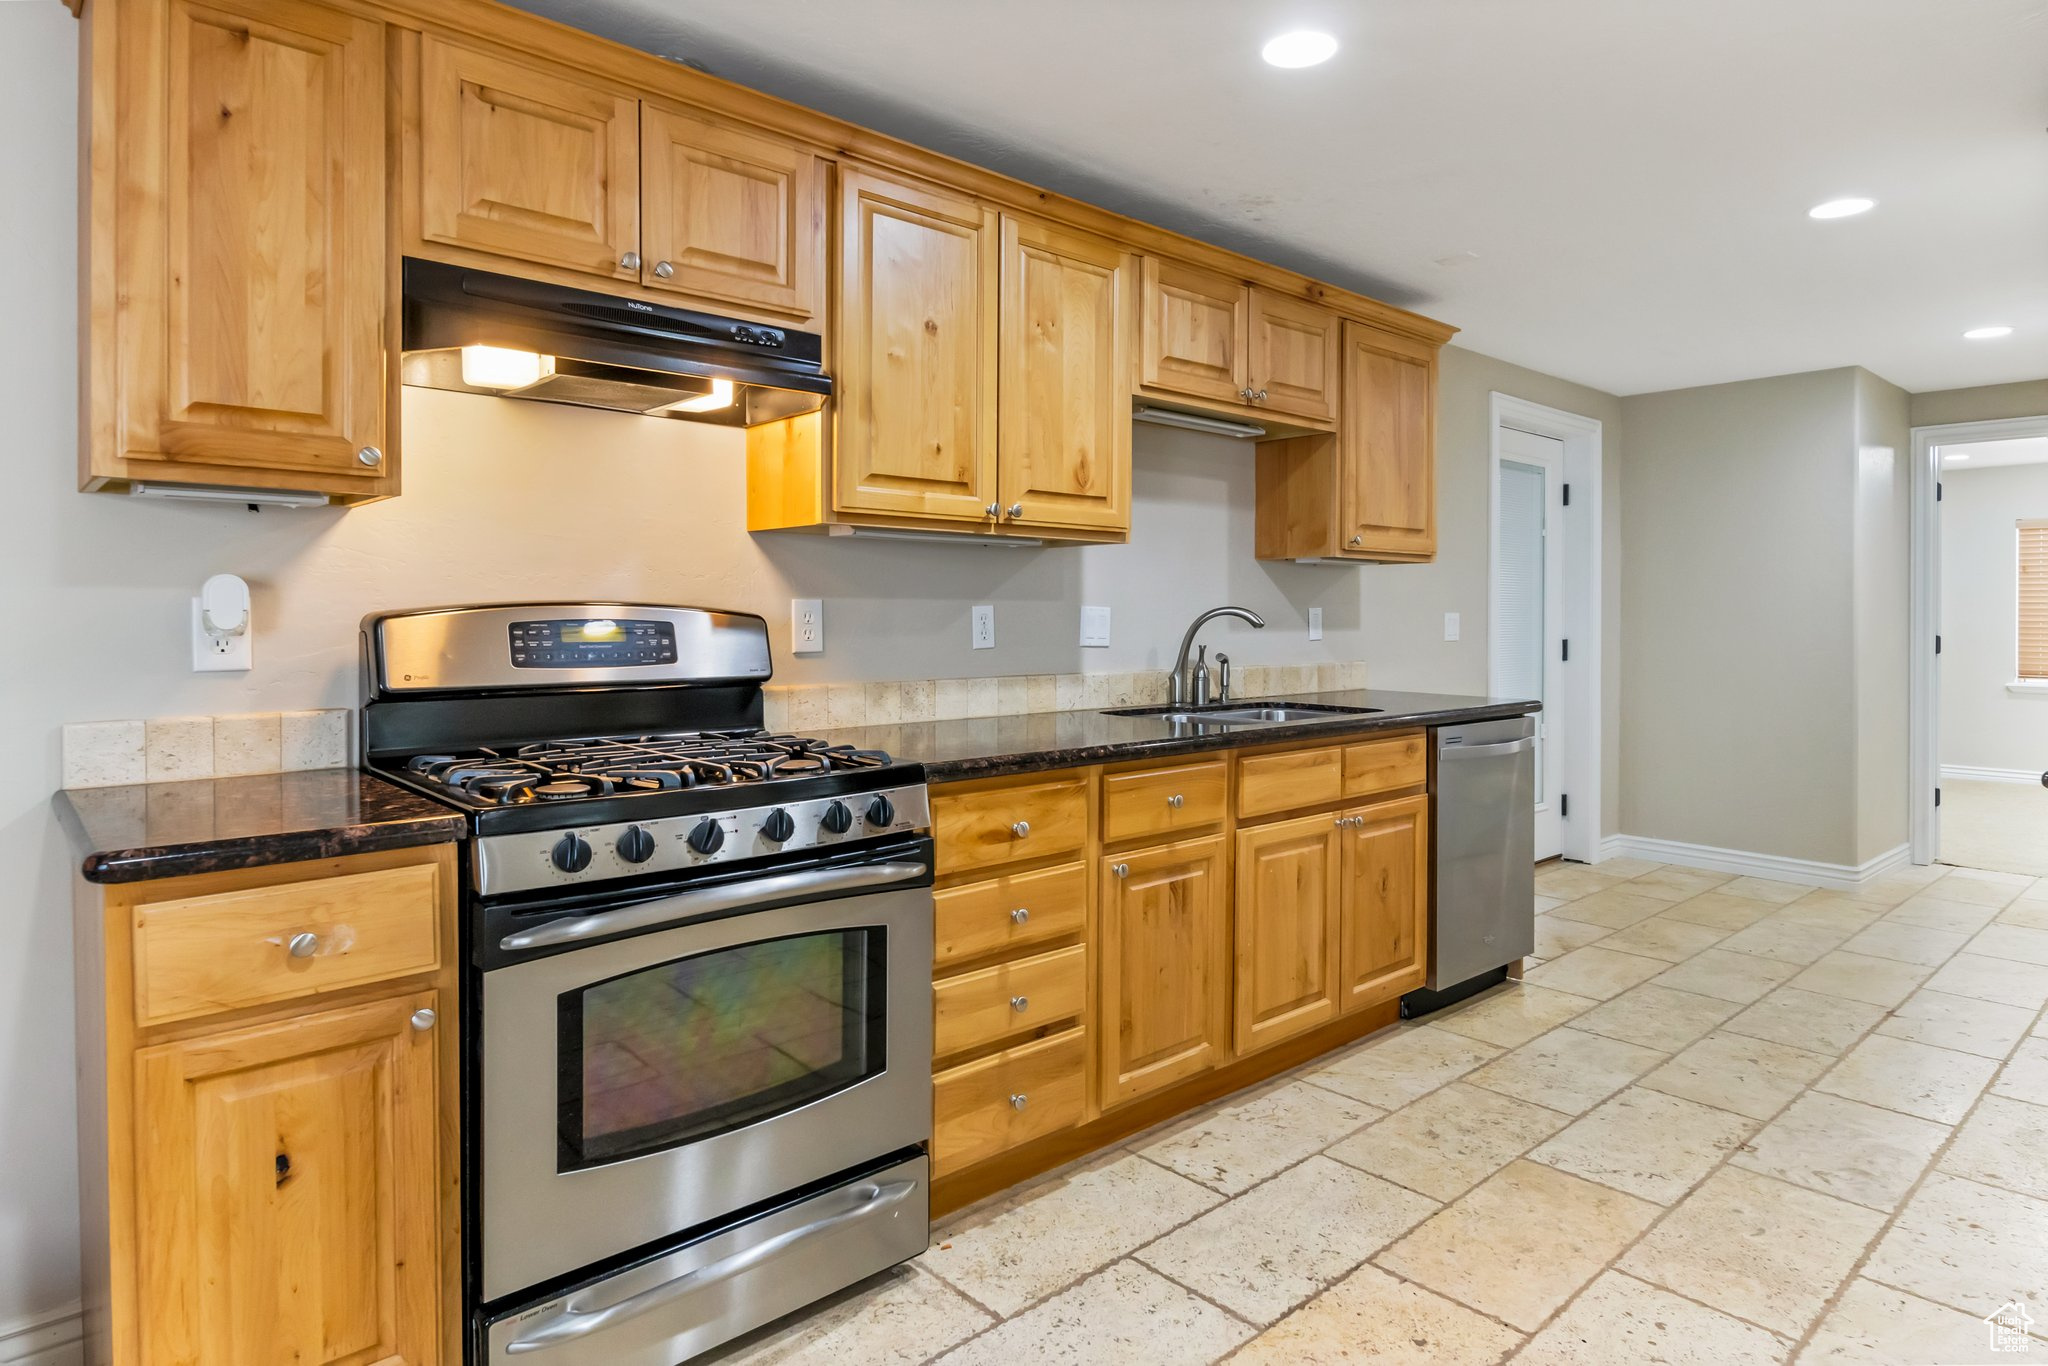 Kitchen with dark stone countertops, stainless steel appliances, light tile floors, and sink